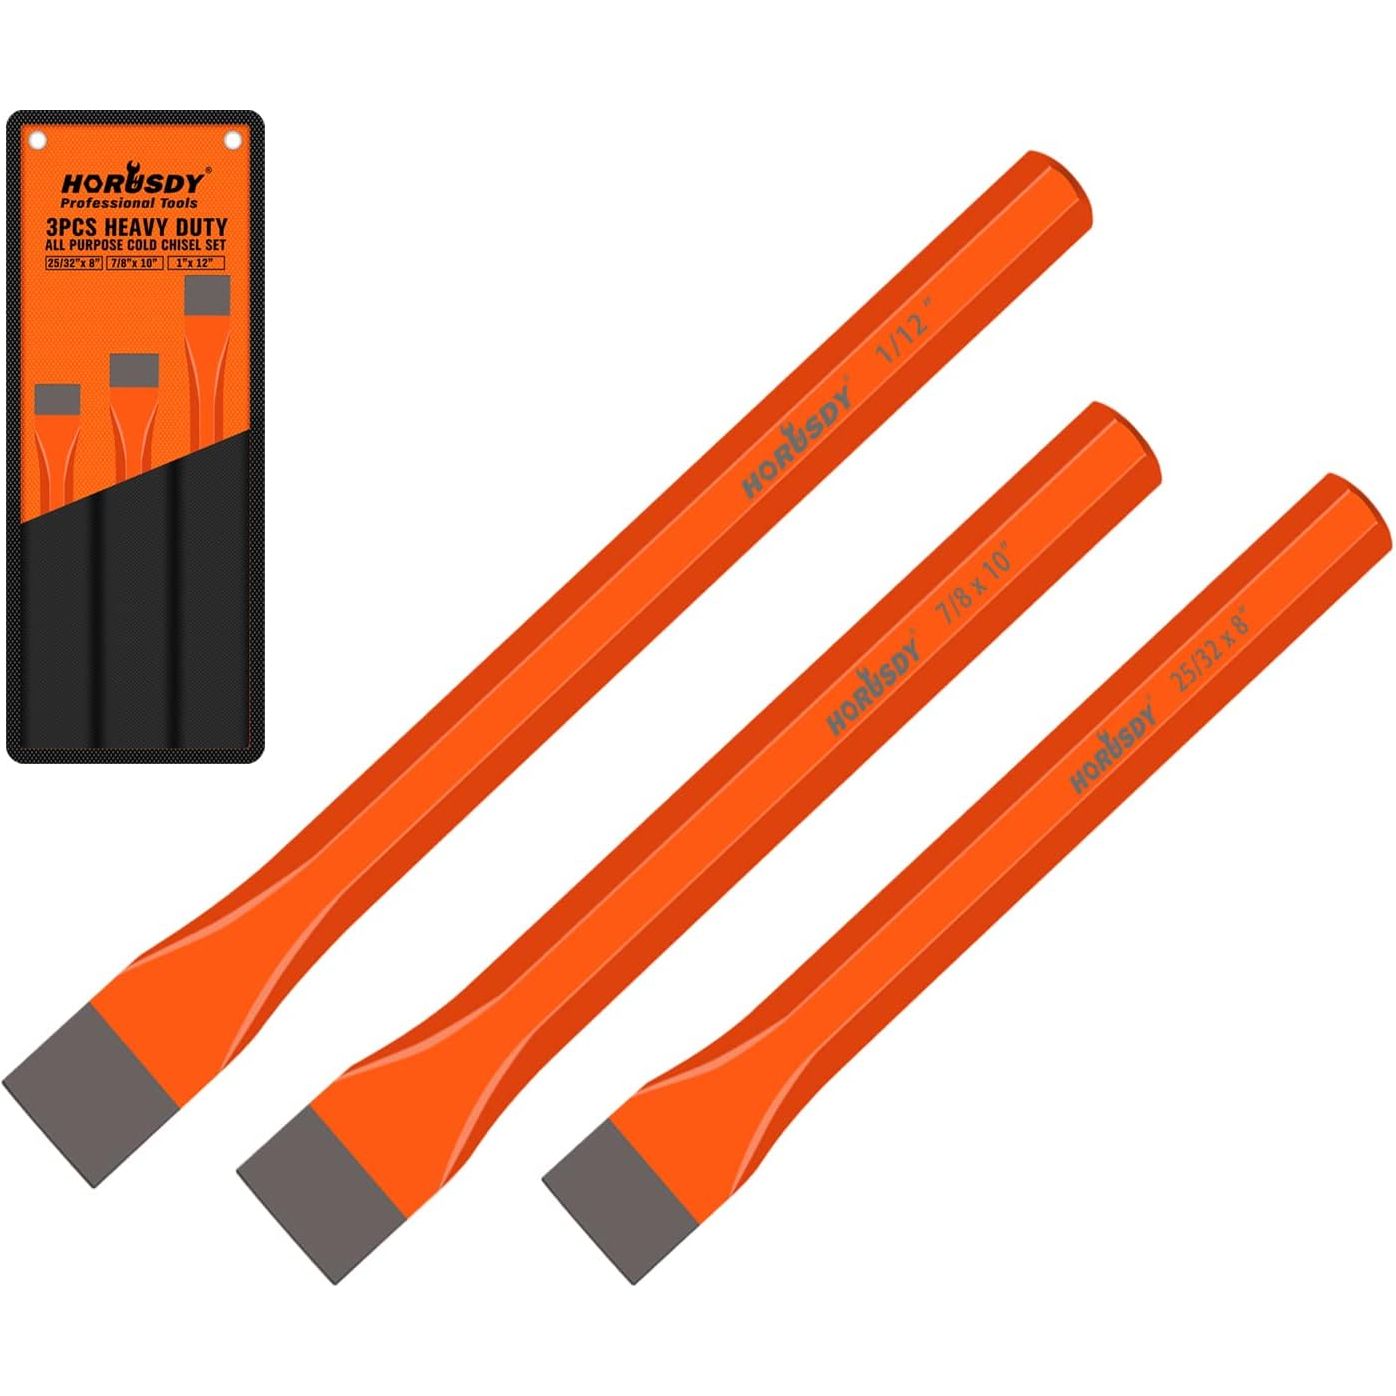 3 Piece Heavy Duty All Purpose Cold Chisel Set, 8", 10", 12" - South East Clearance Centre